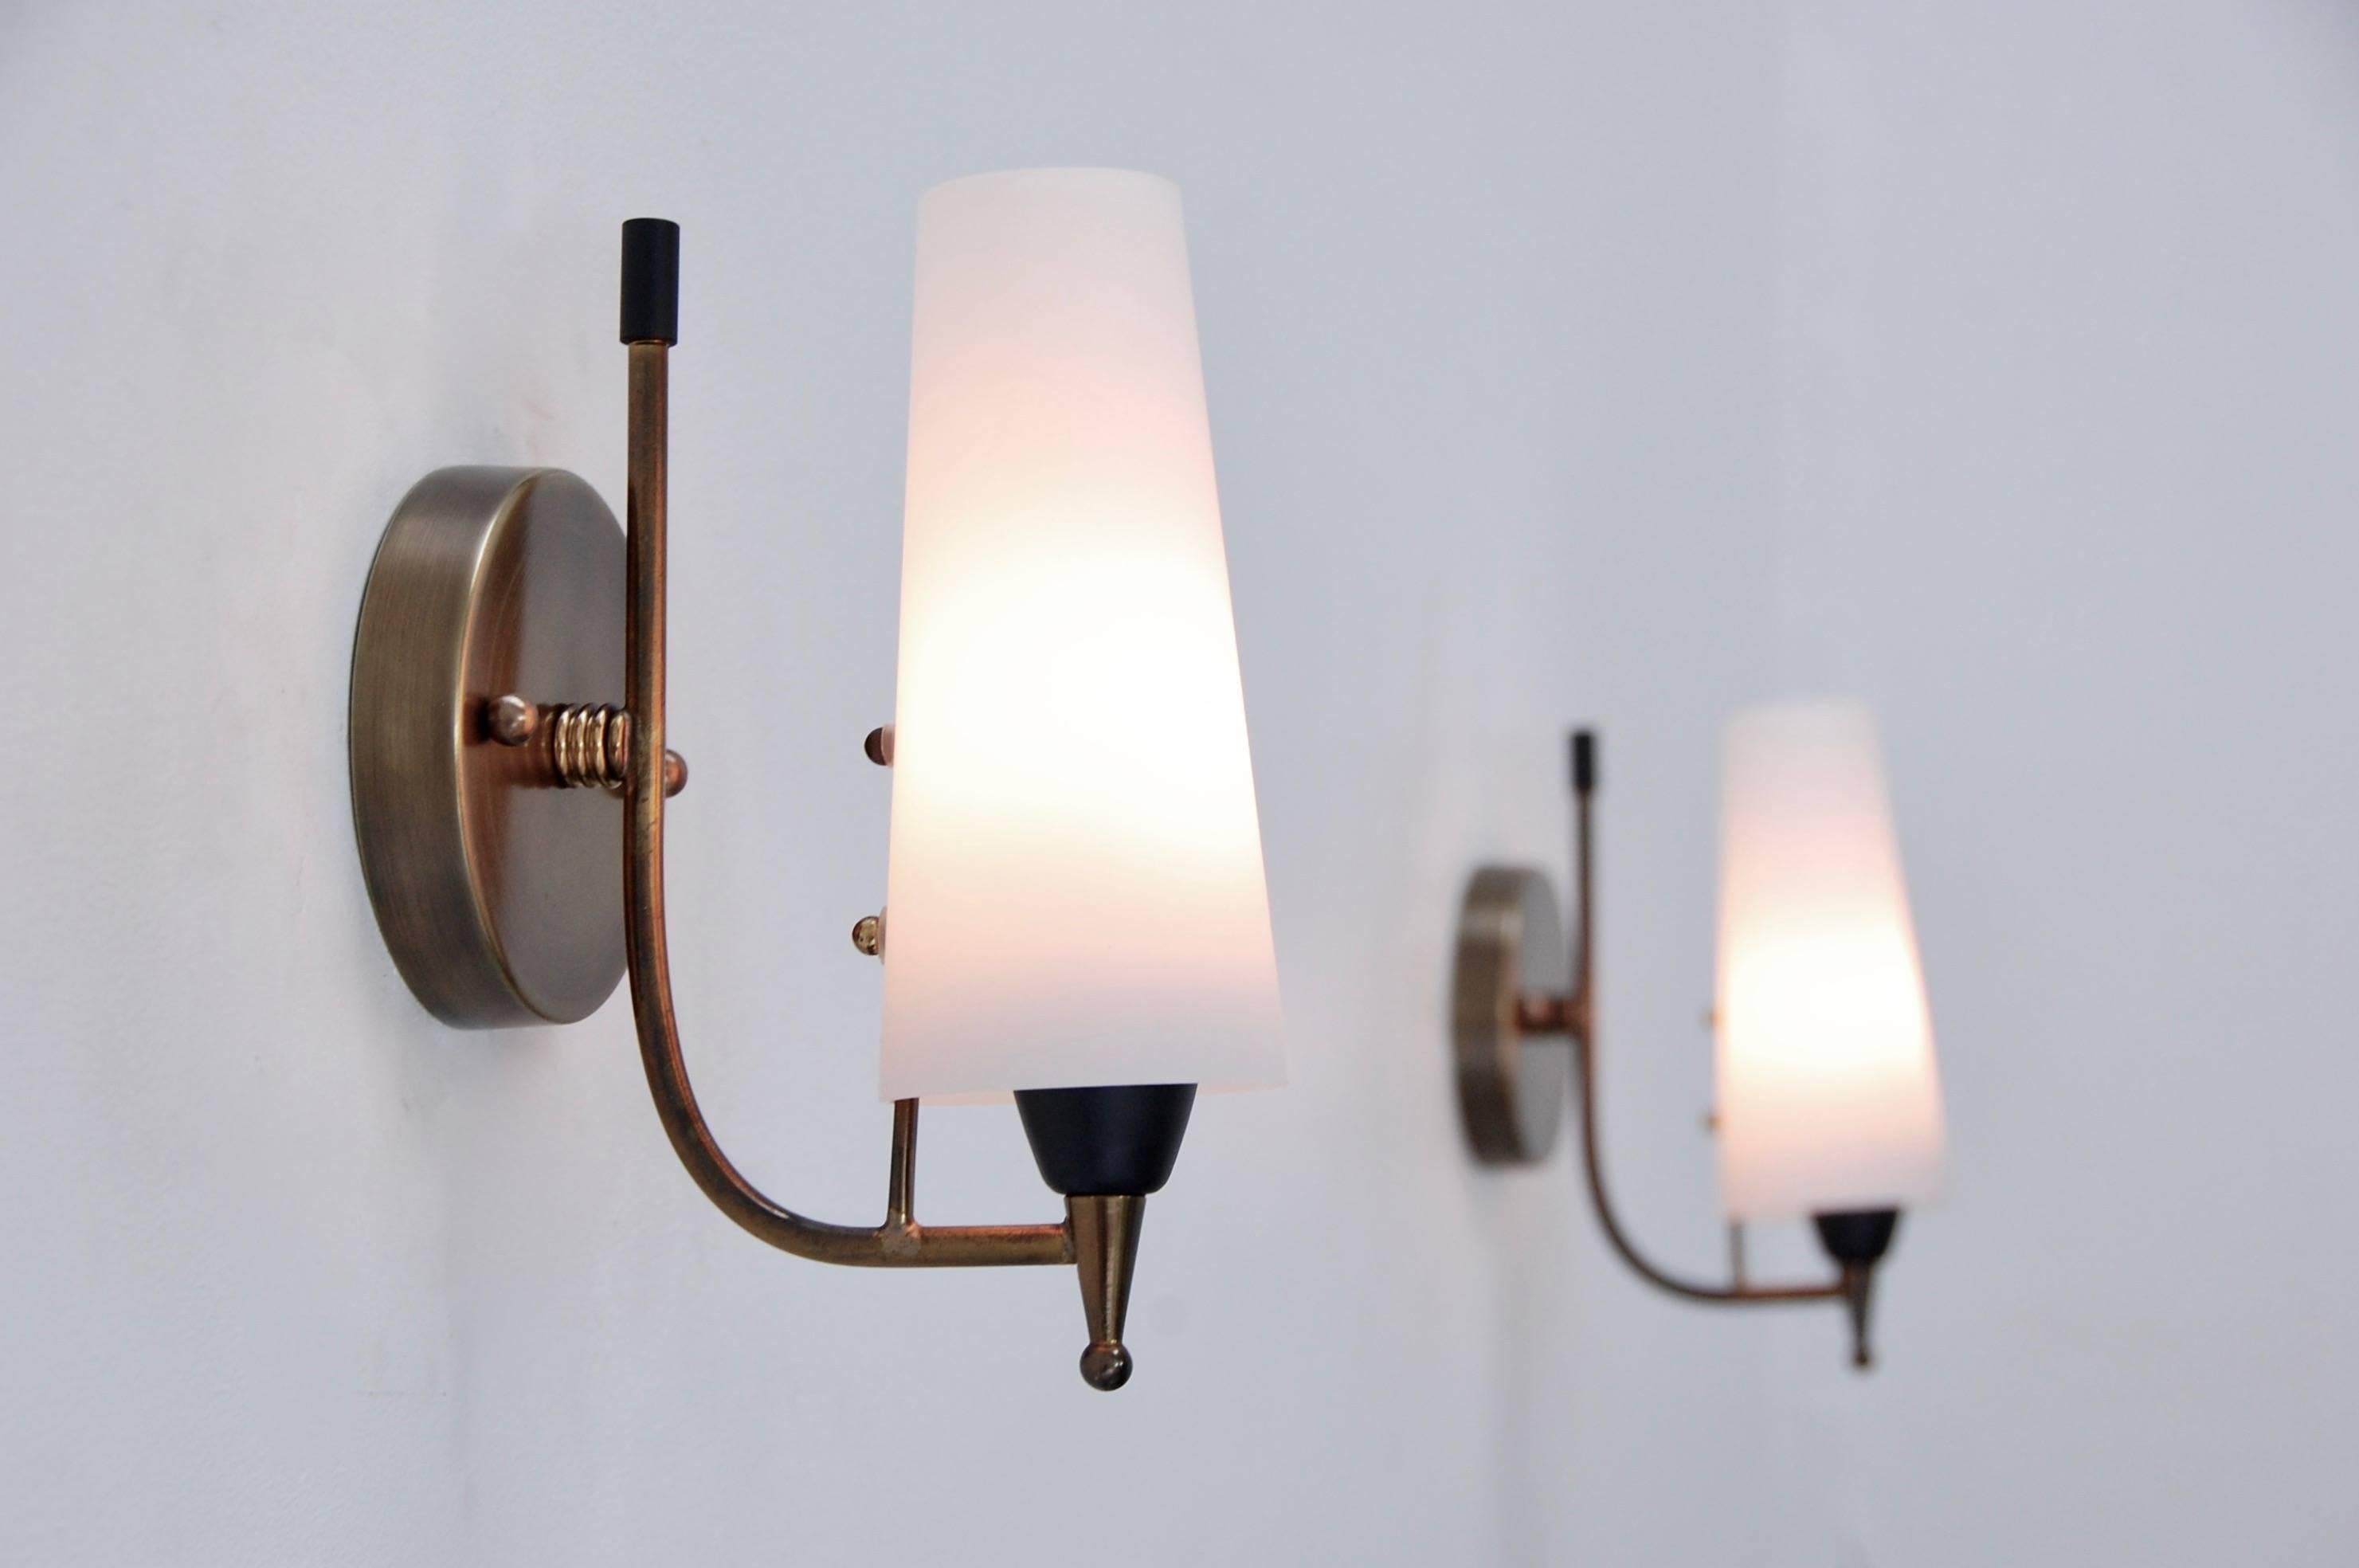 A pair of Classic 1950s brass and glass conical shade sconces from Italy. Fully restored, patina lacquered brass finish with a single E12 based socket per sconce. Maximum wattage 40-60 watts per socket. Back plate has 2 ¾” centre to centre mounting